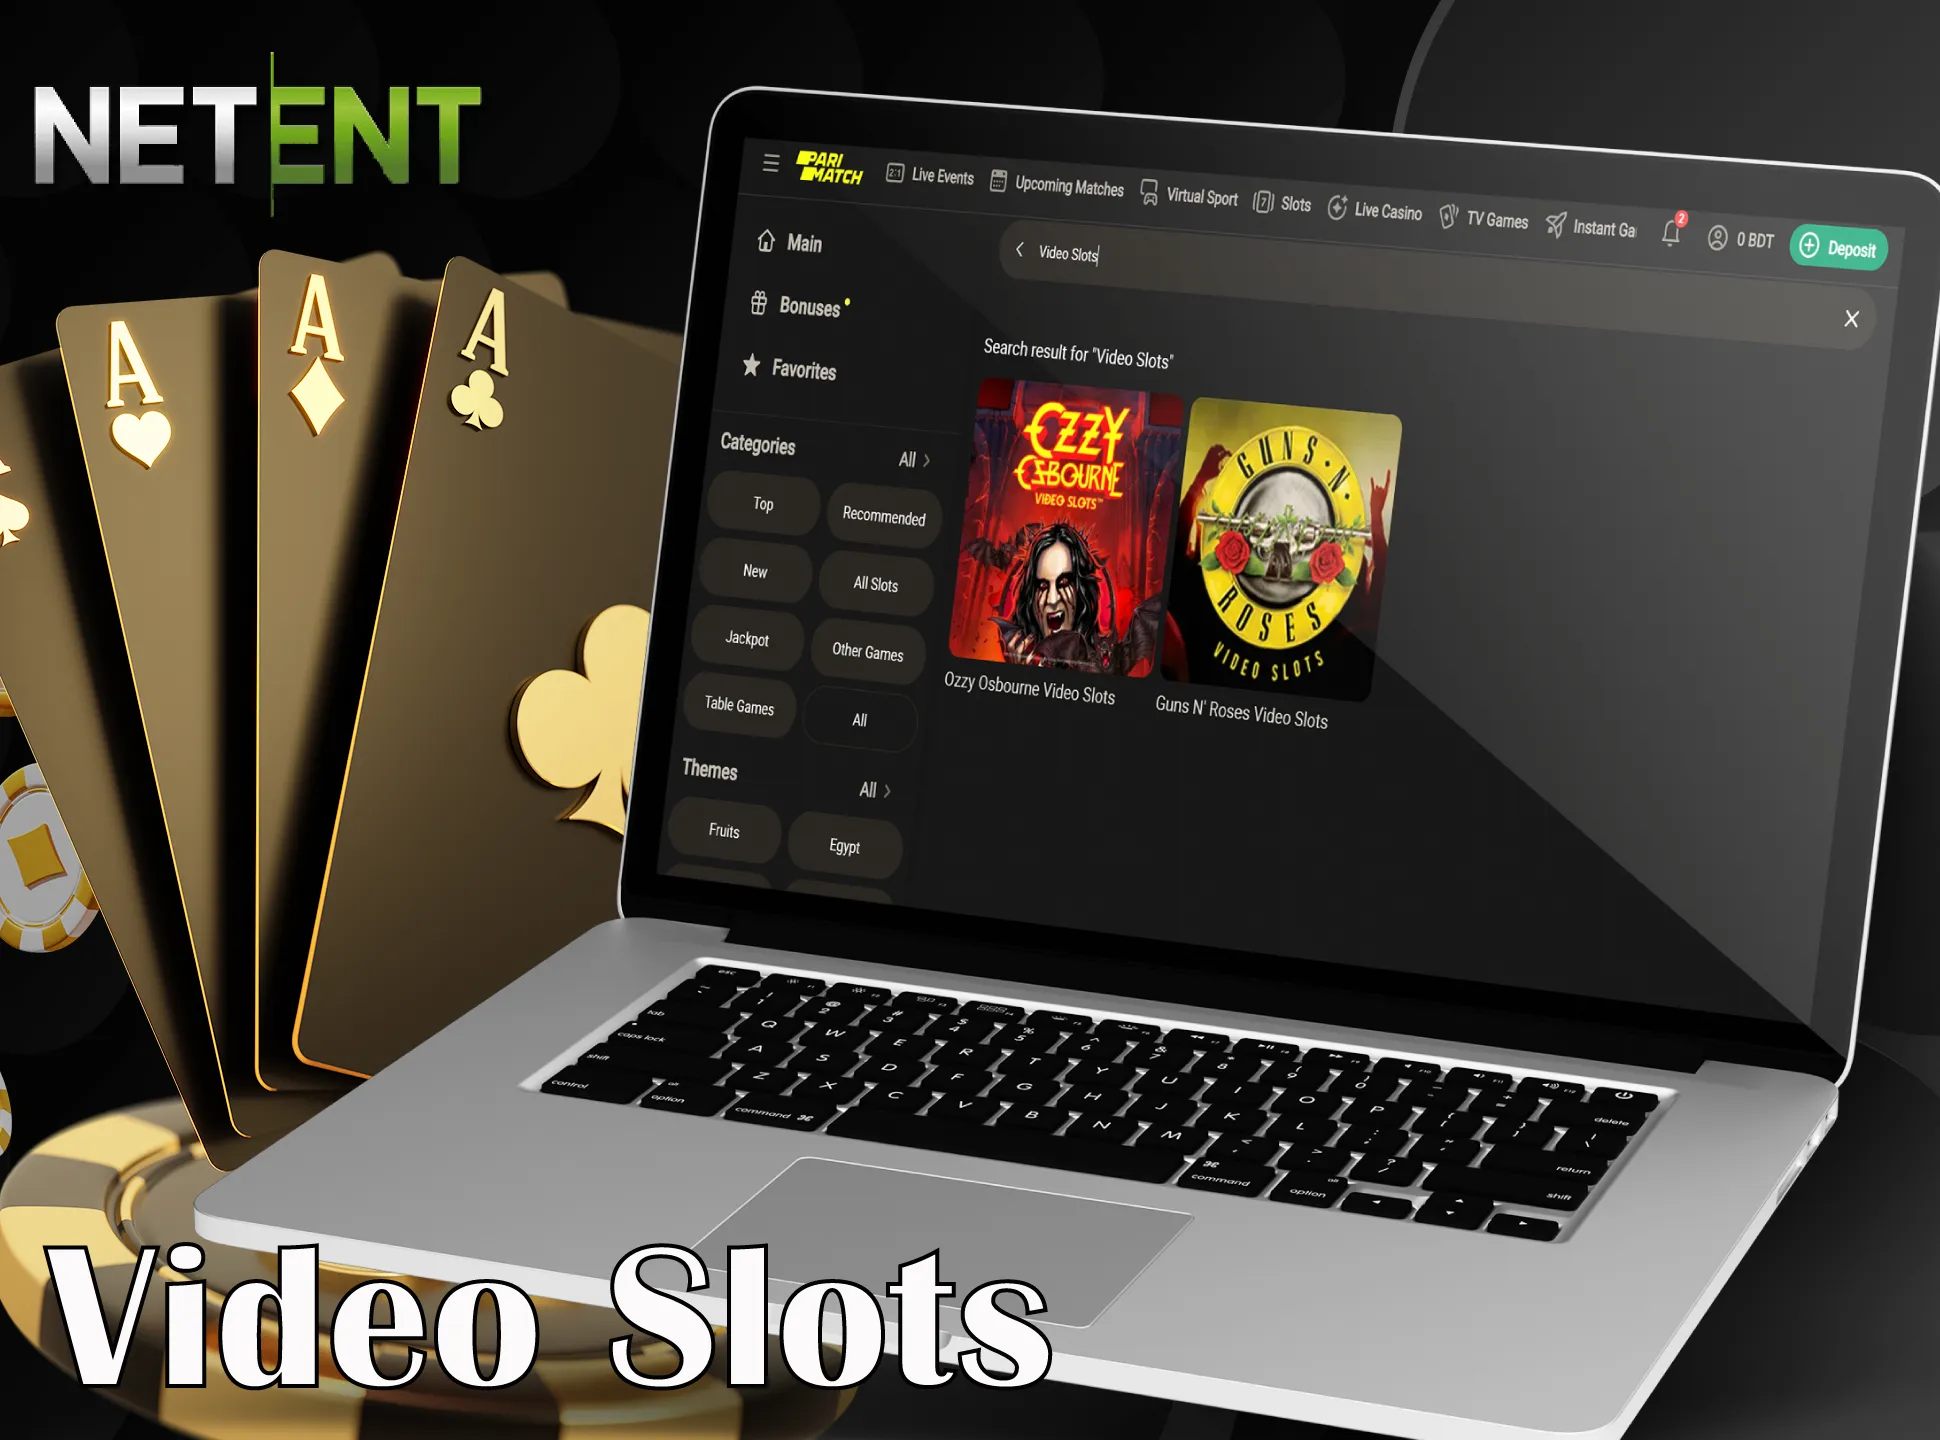 NetEnt also creates video slots for online casinos.